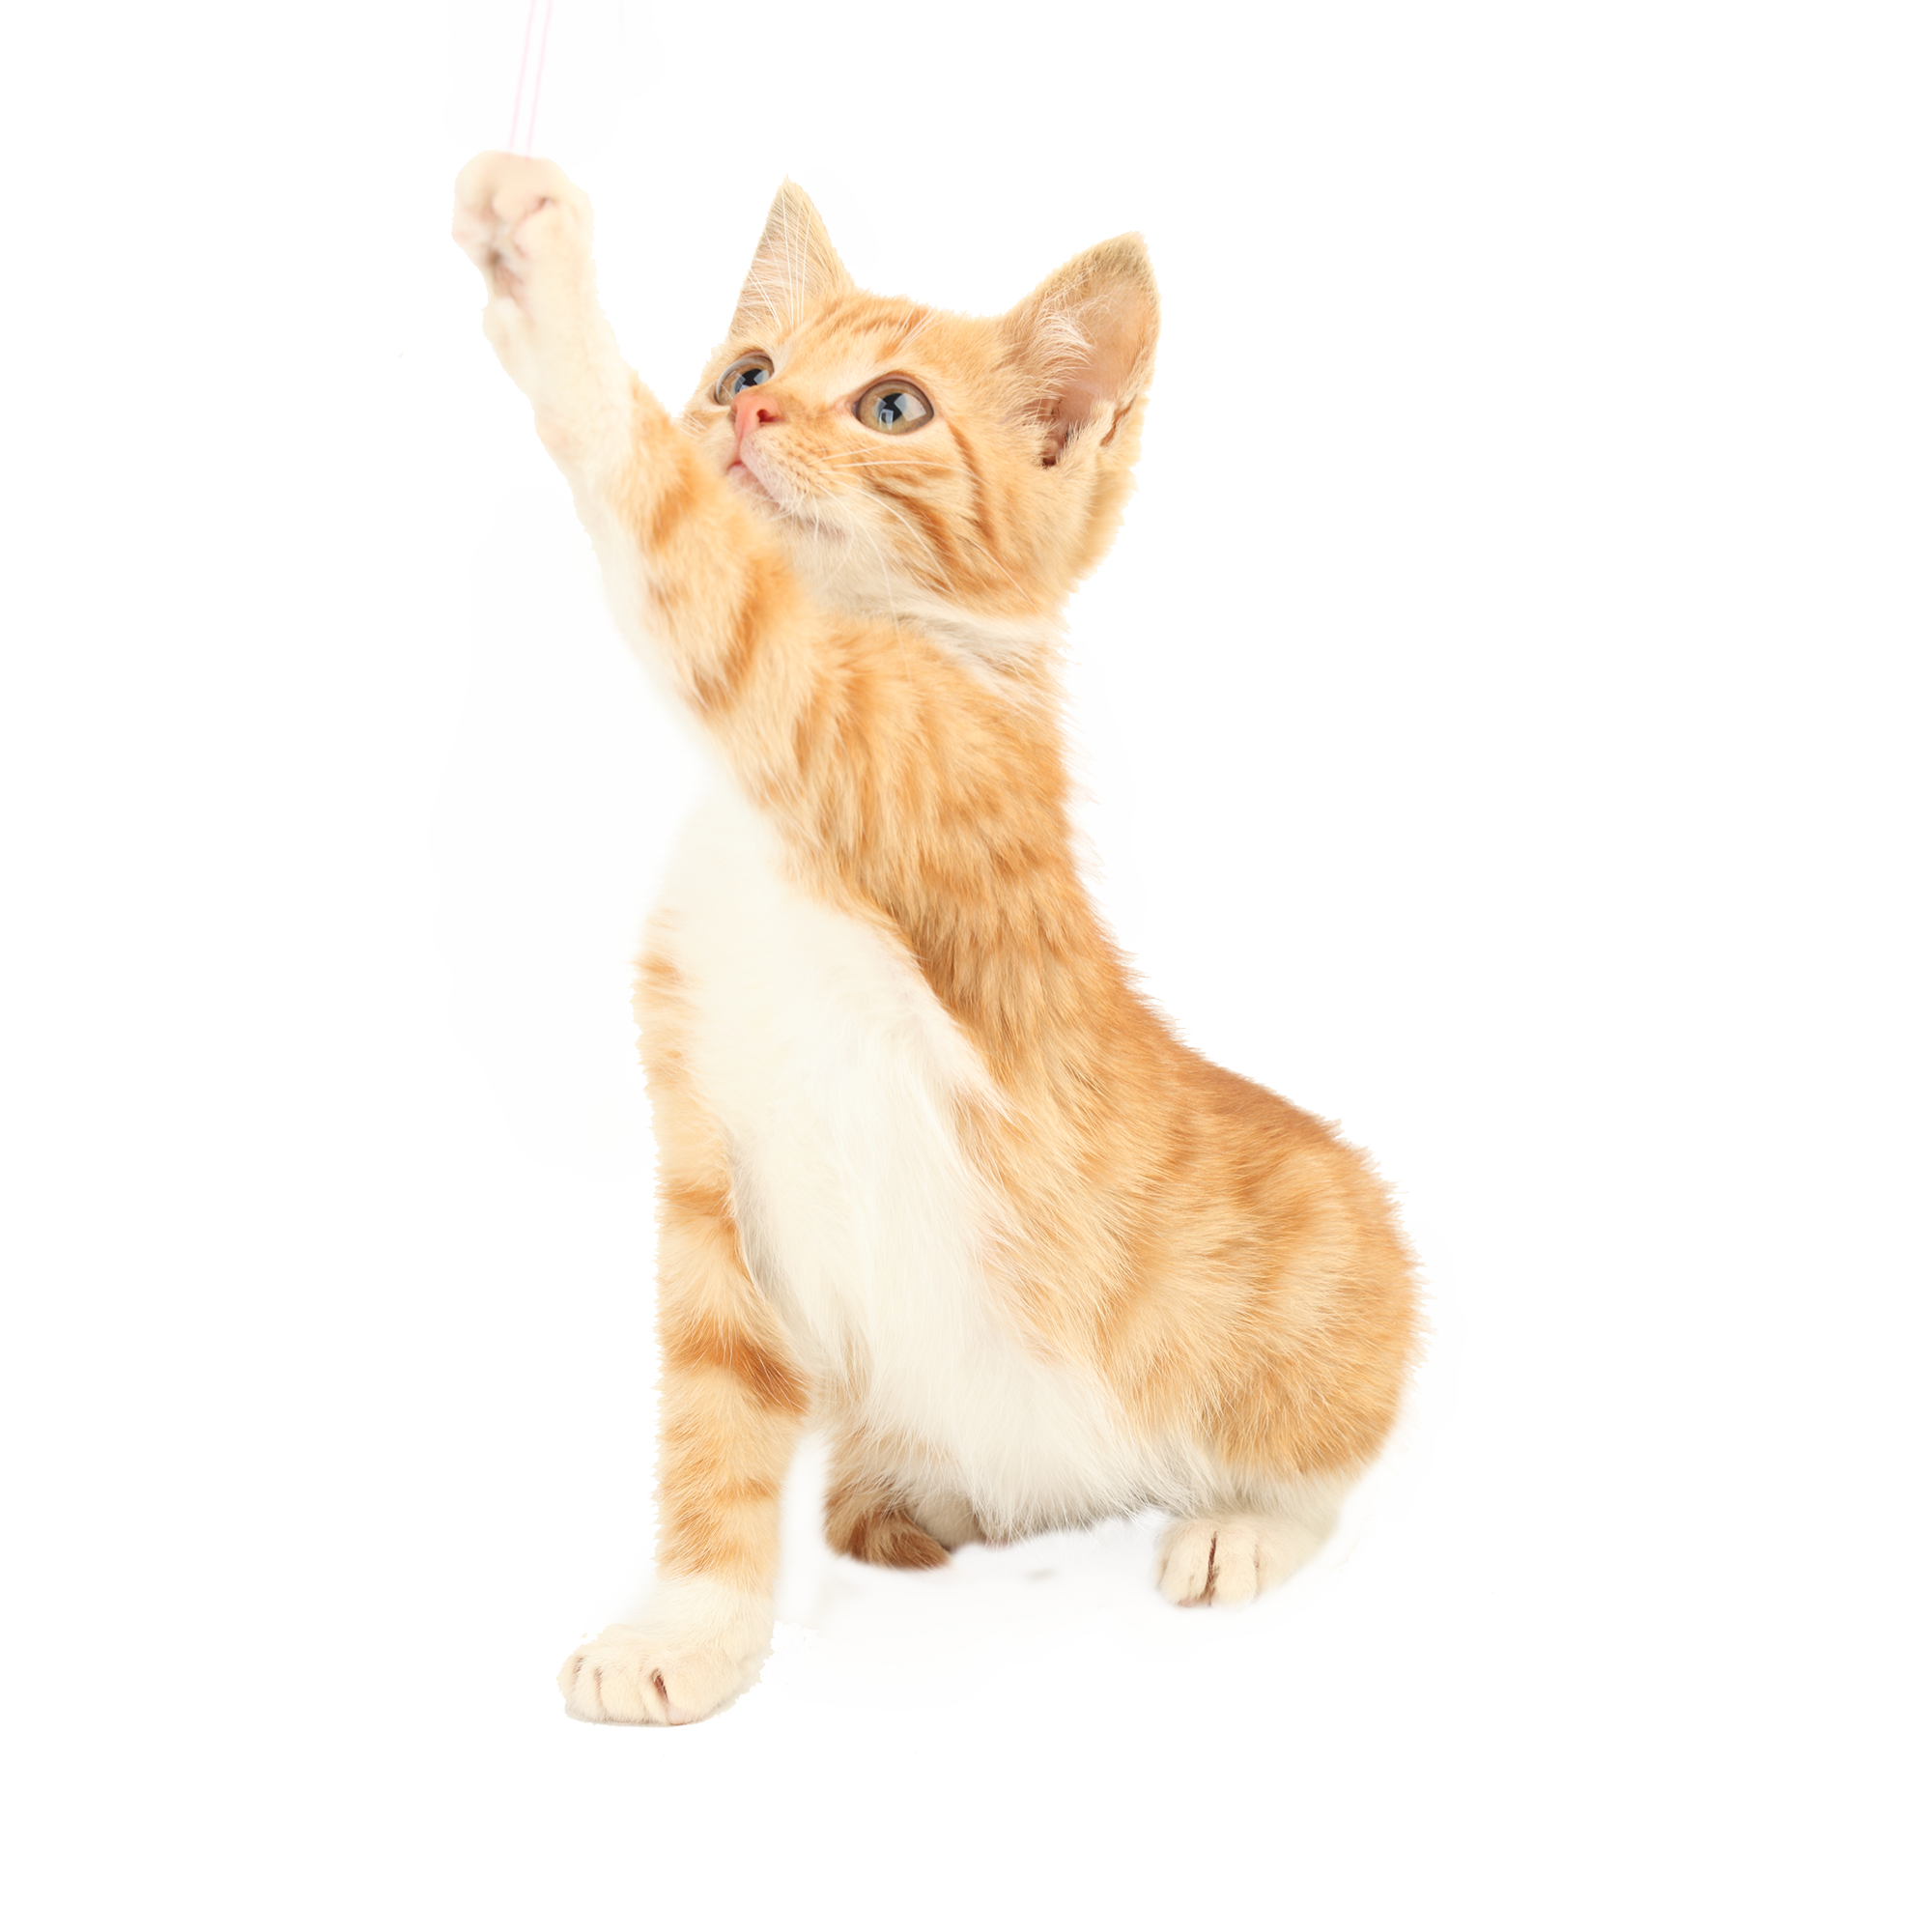 Cat PNG Picture